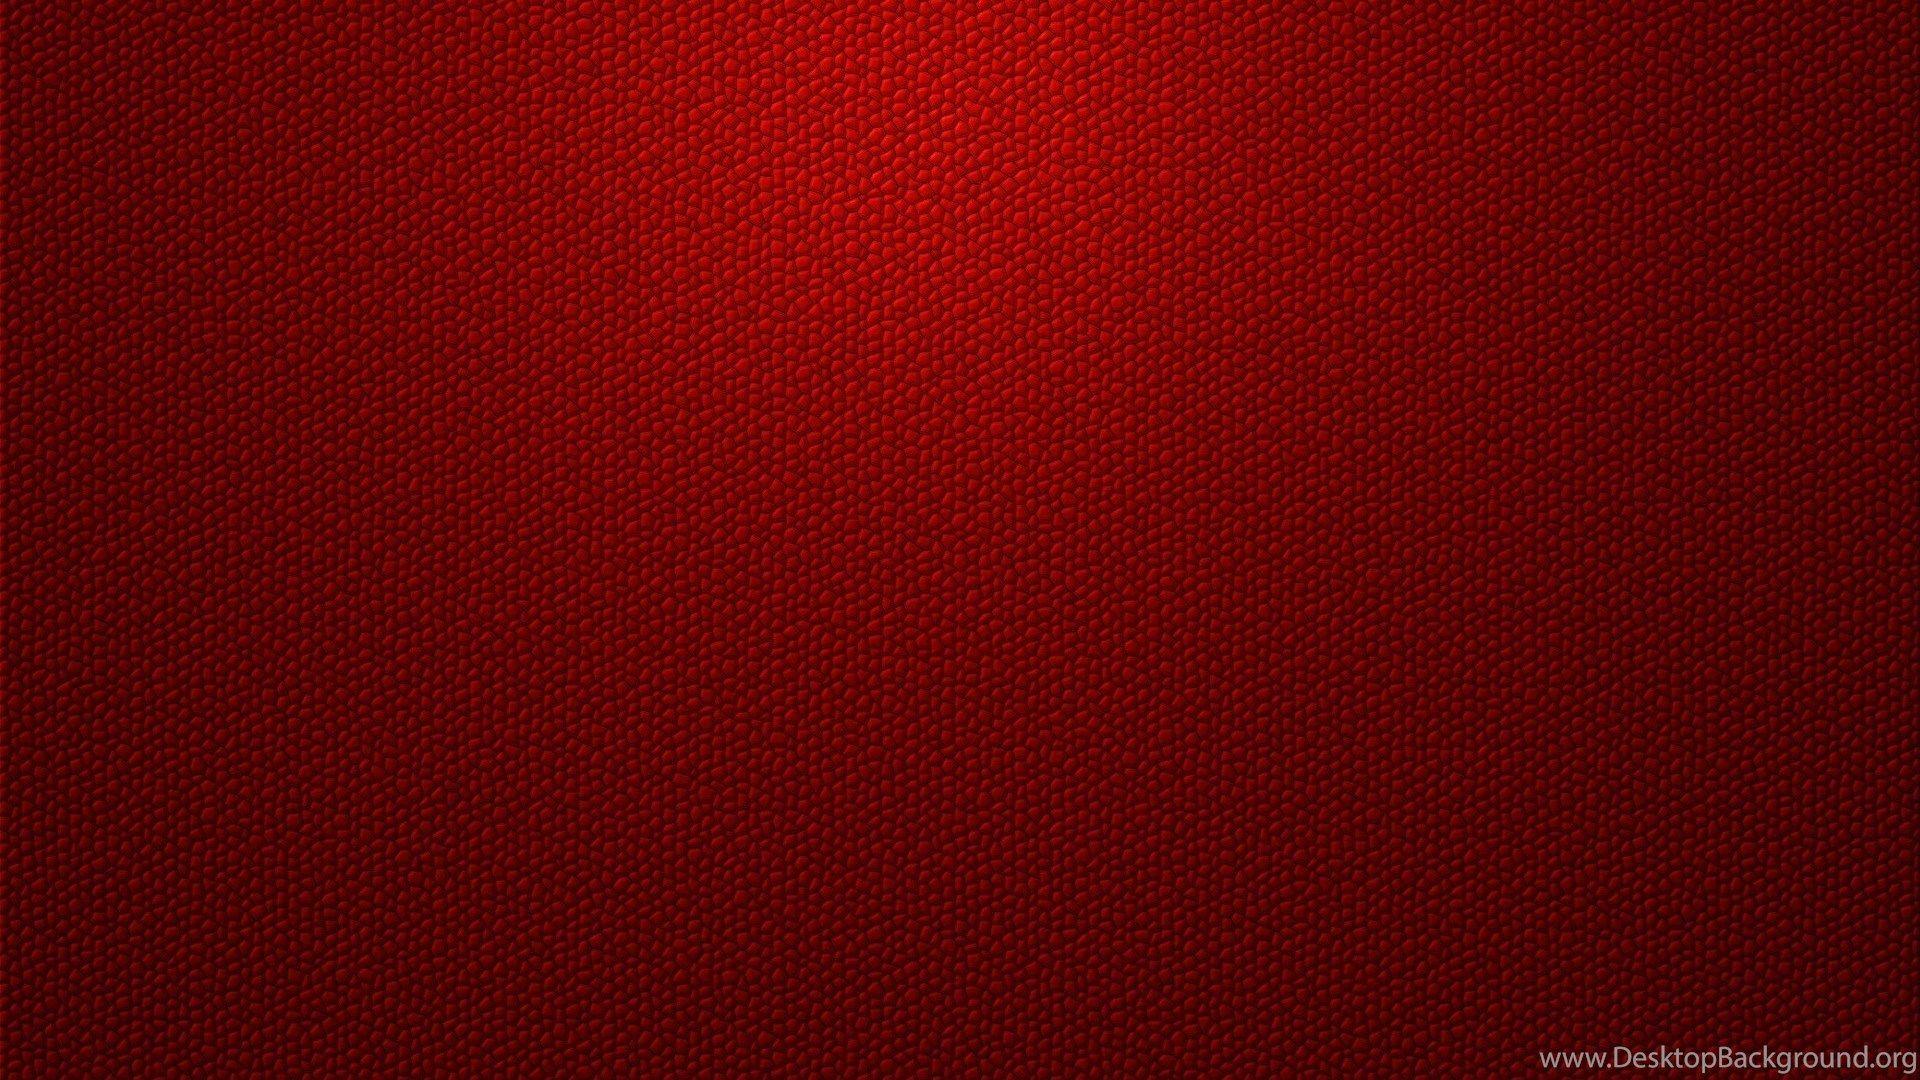 Plain Red Wallpapers - Wallpaper Cave